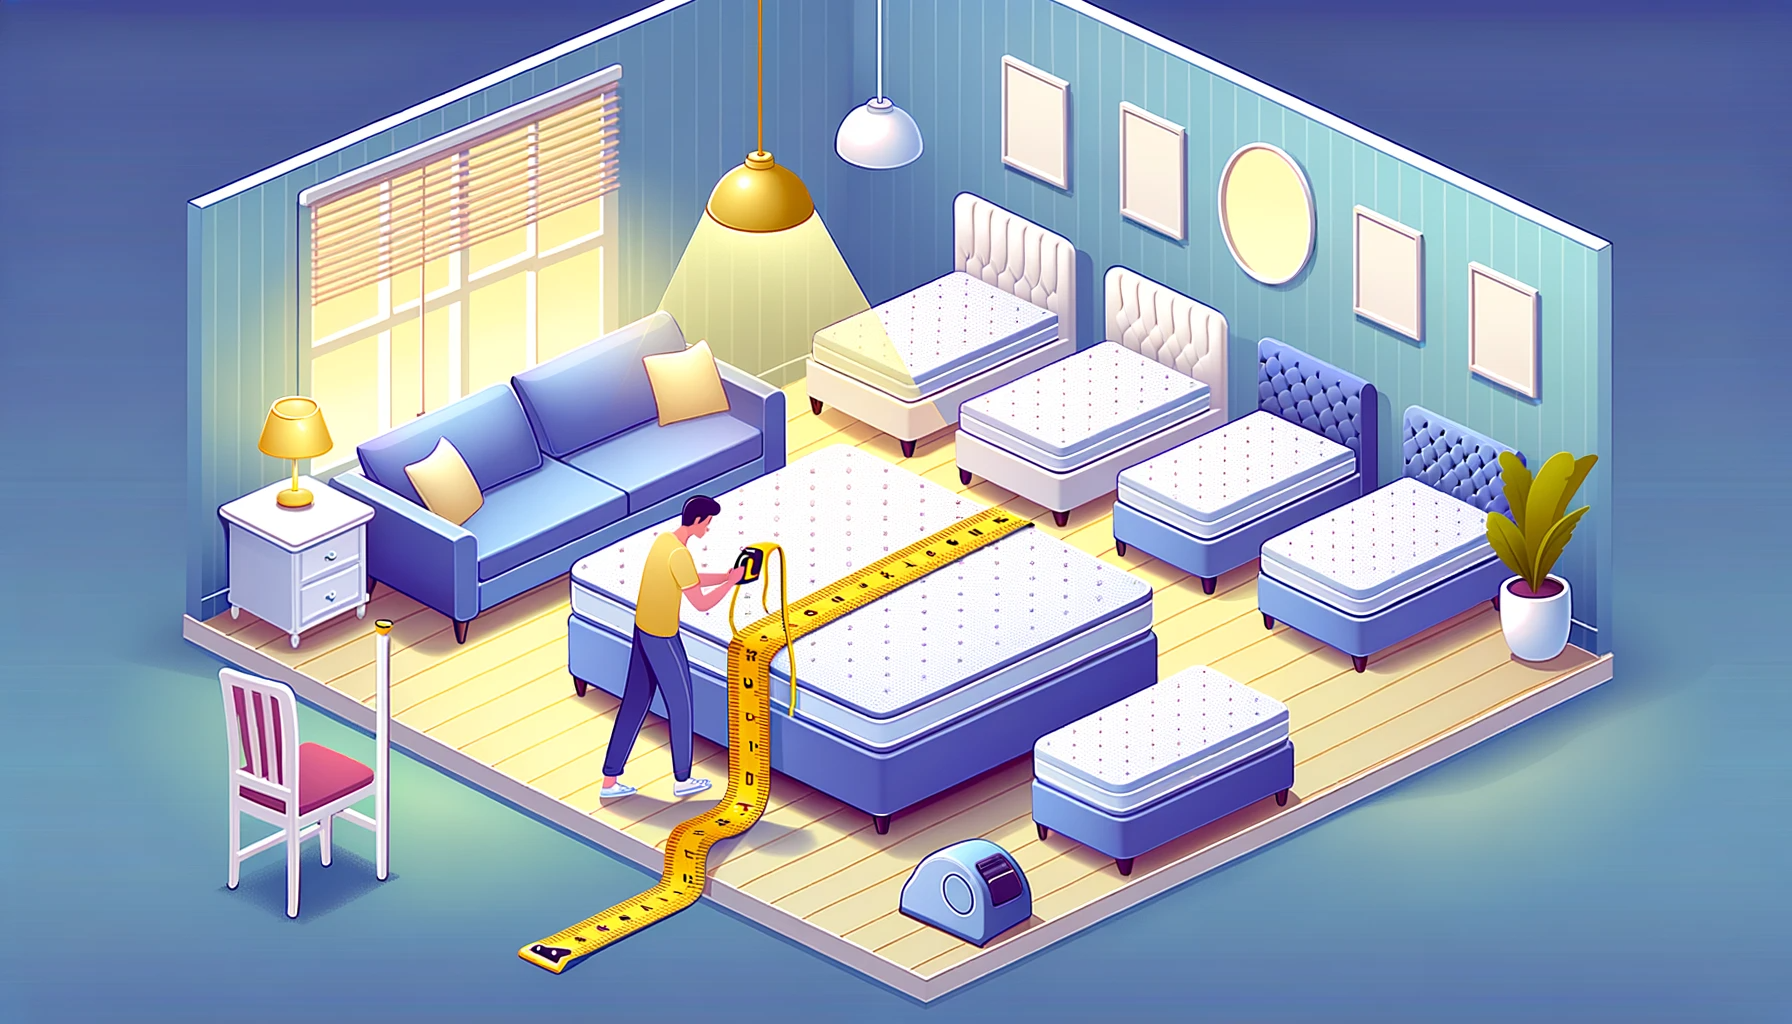 16:9 colorful vector illustration of a modern bedroom where an individual is actively measuring a mattress with a tape measure. Around the room, there are different mattress sizes showcased, with a golden spotlight on the ideal mattress size that the individual has chosen.